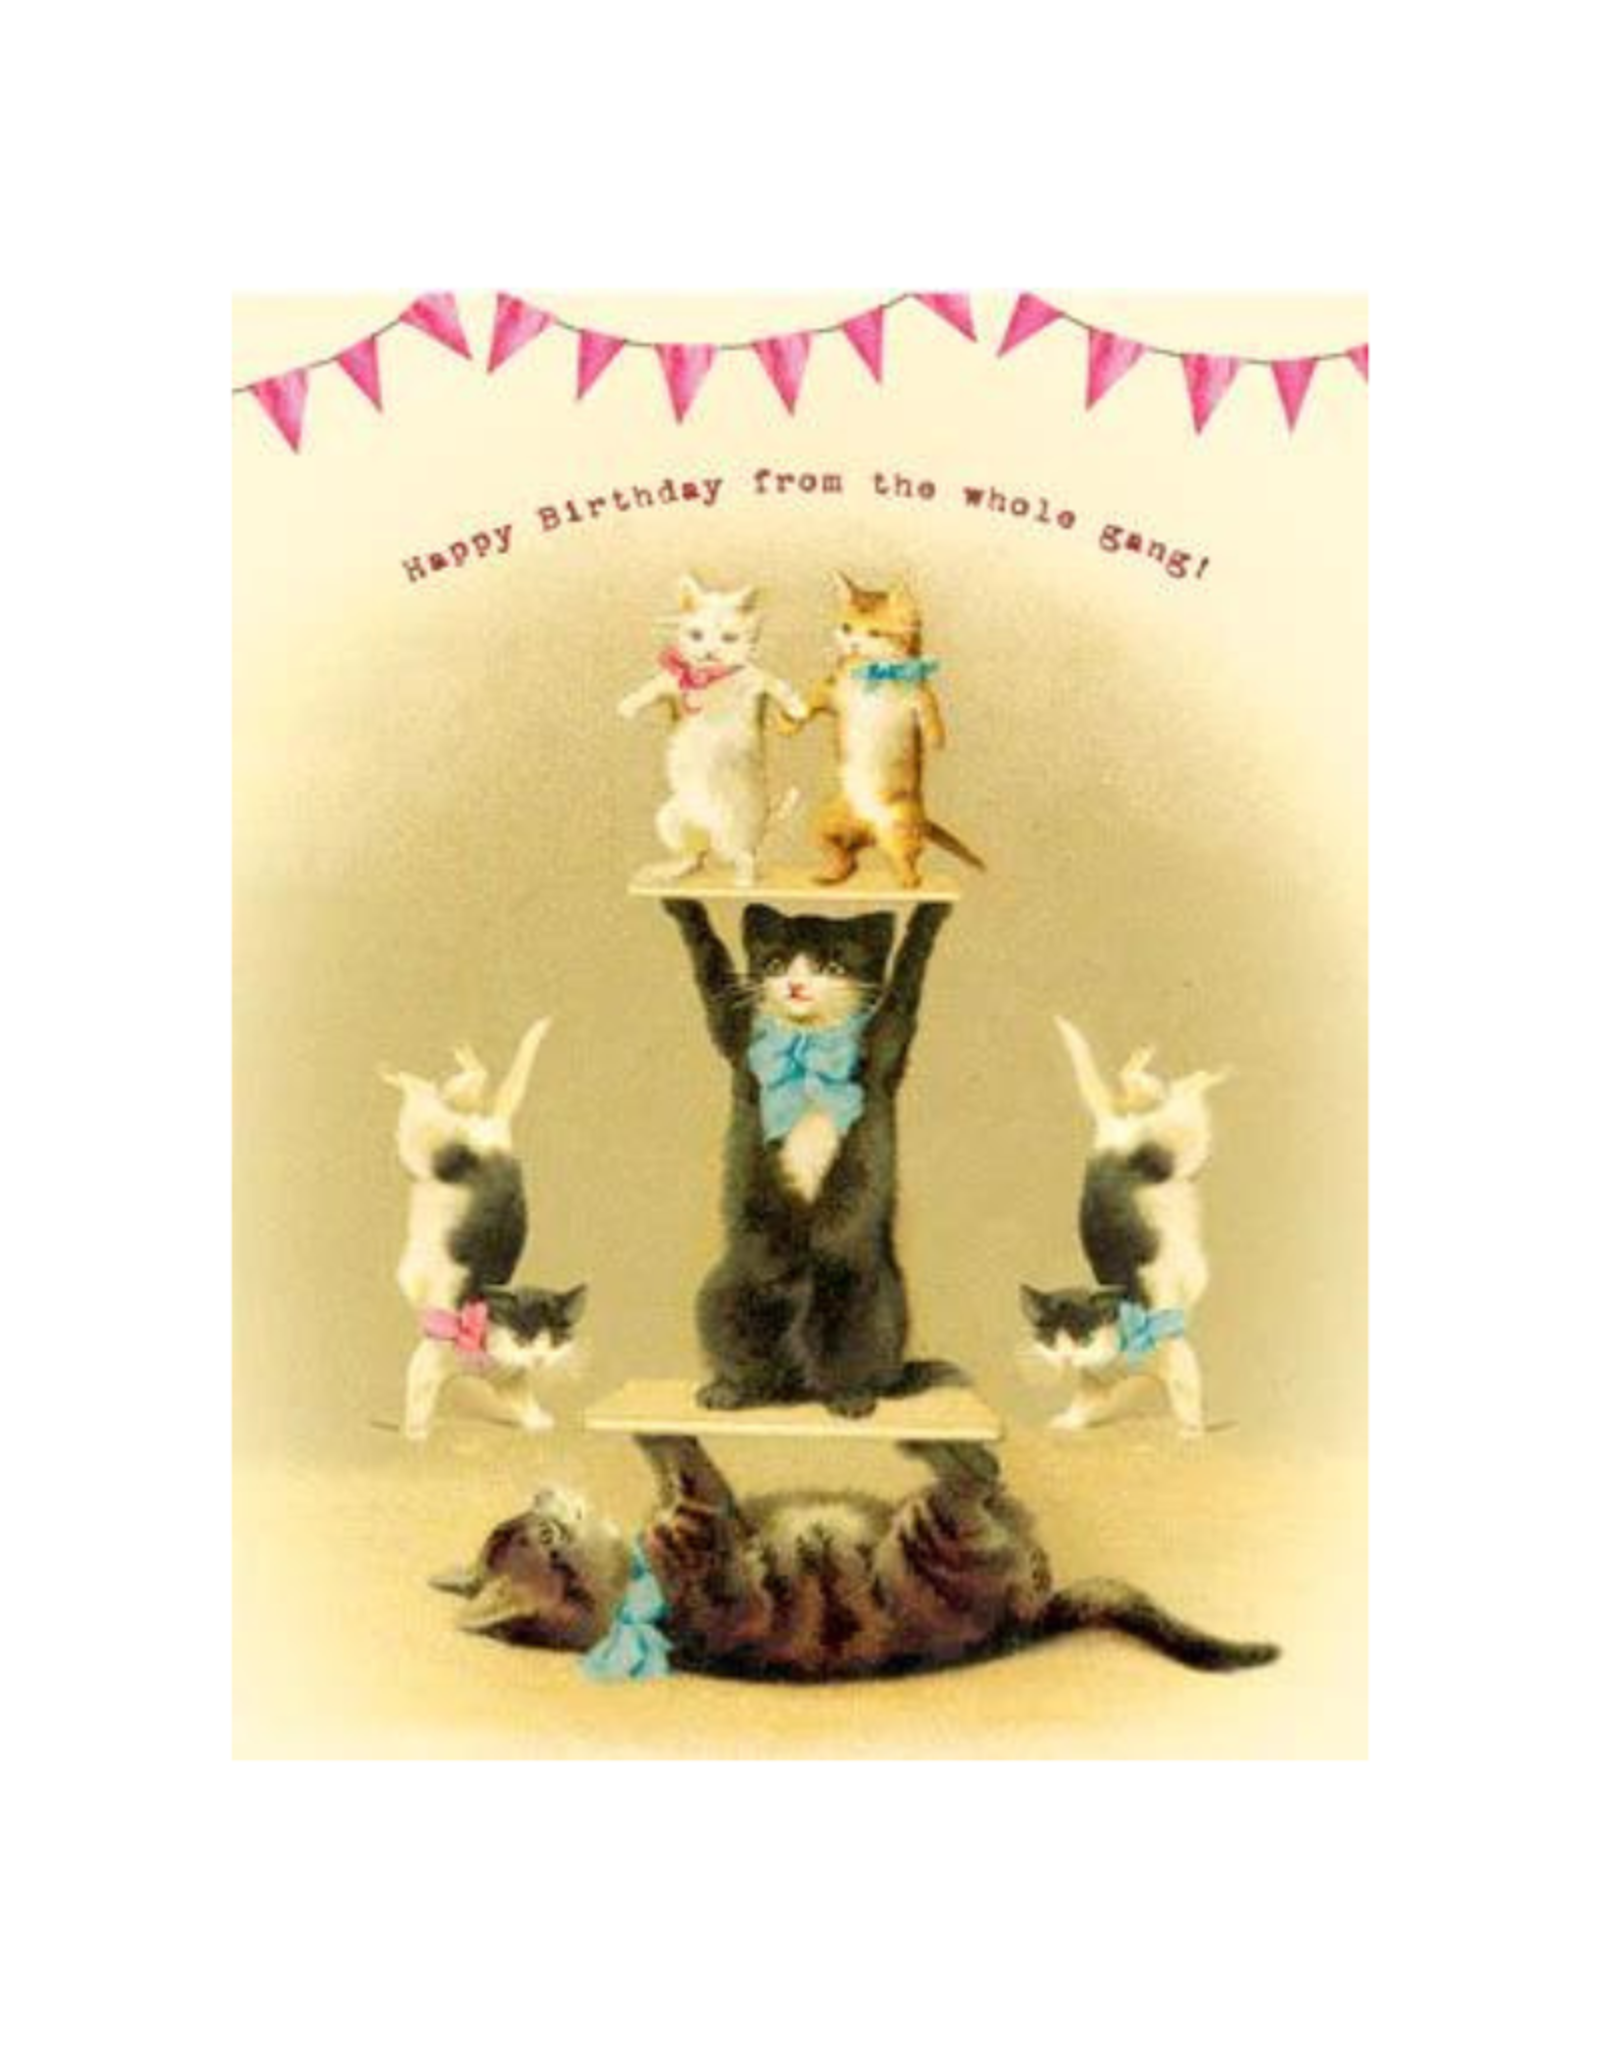 CARD-BIRTHDAY-FROM THE WHOLE GANG